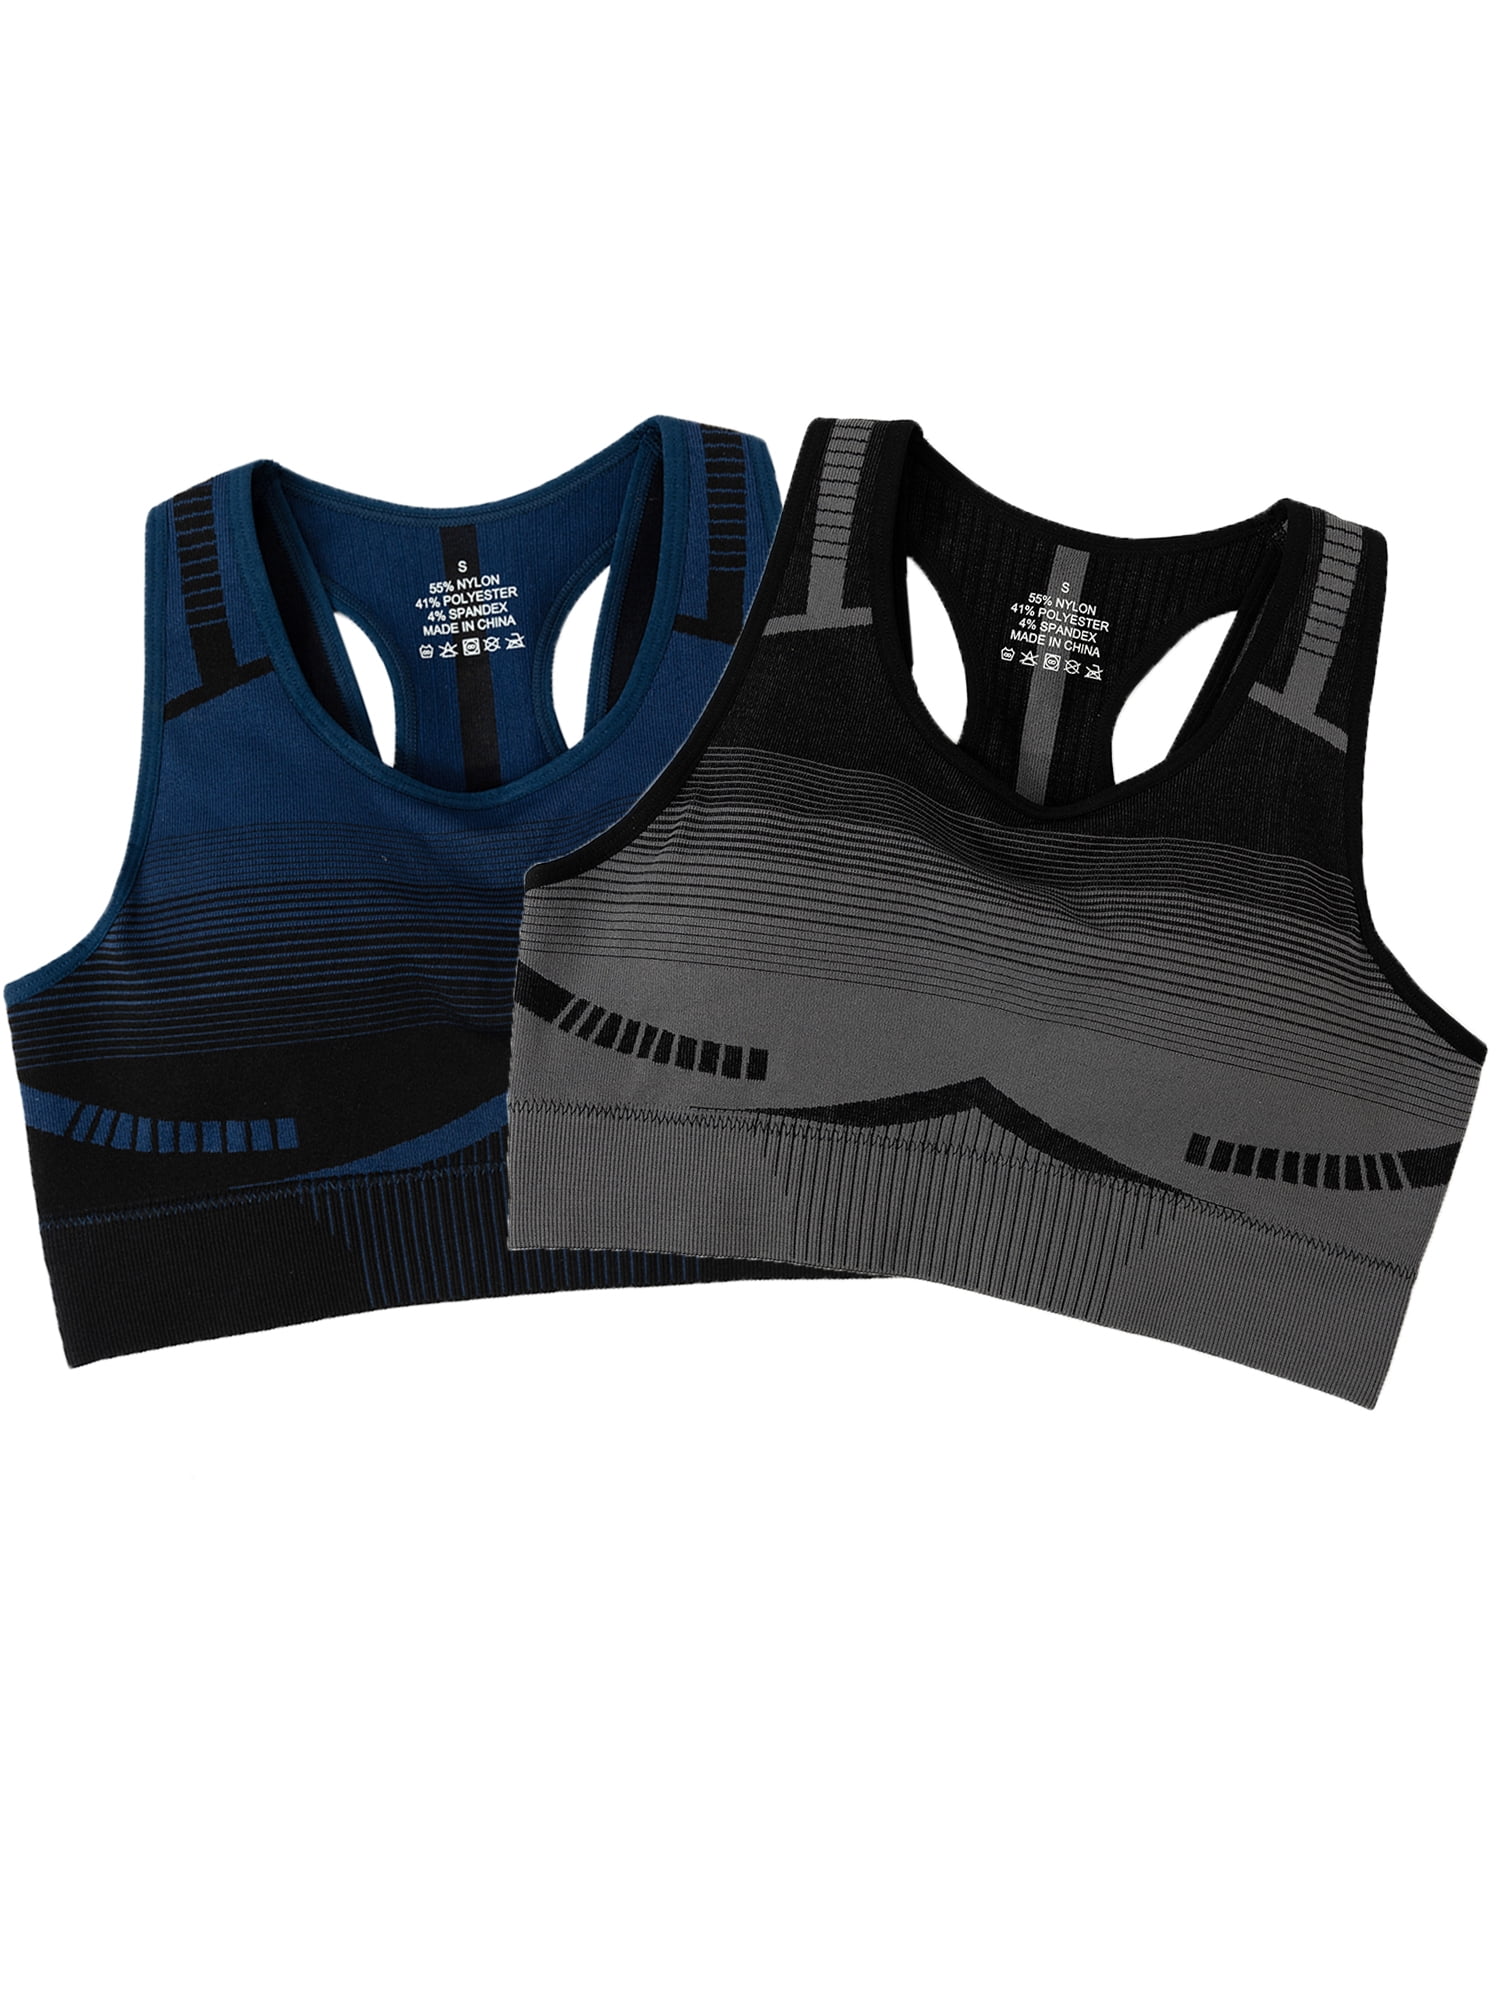 2 Pack Removable Padded Sports Bra for Women High Impact Sports